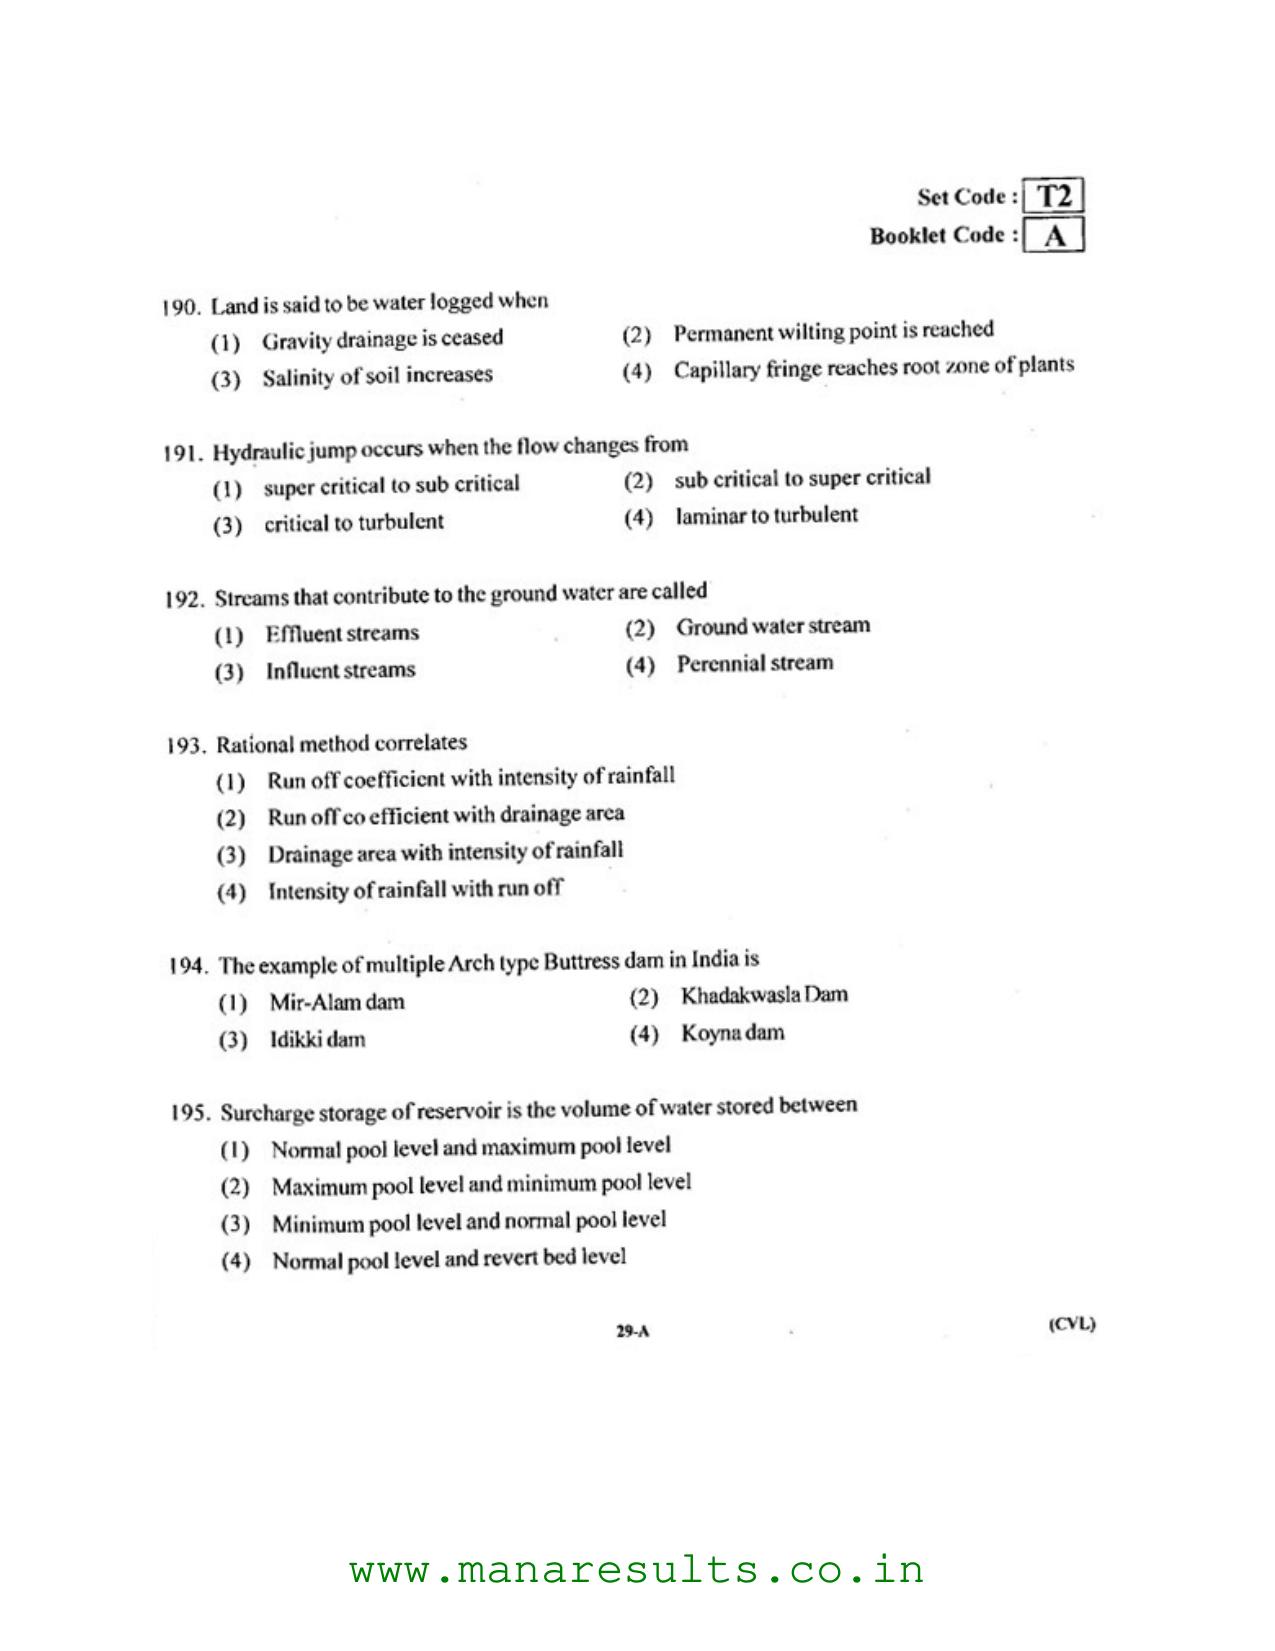 AP ECET 2016 Civil Engineering Old Previous Question Papers - Page 28